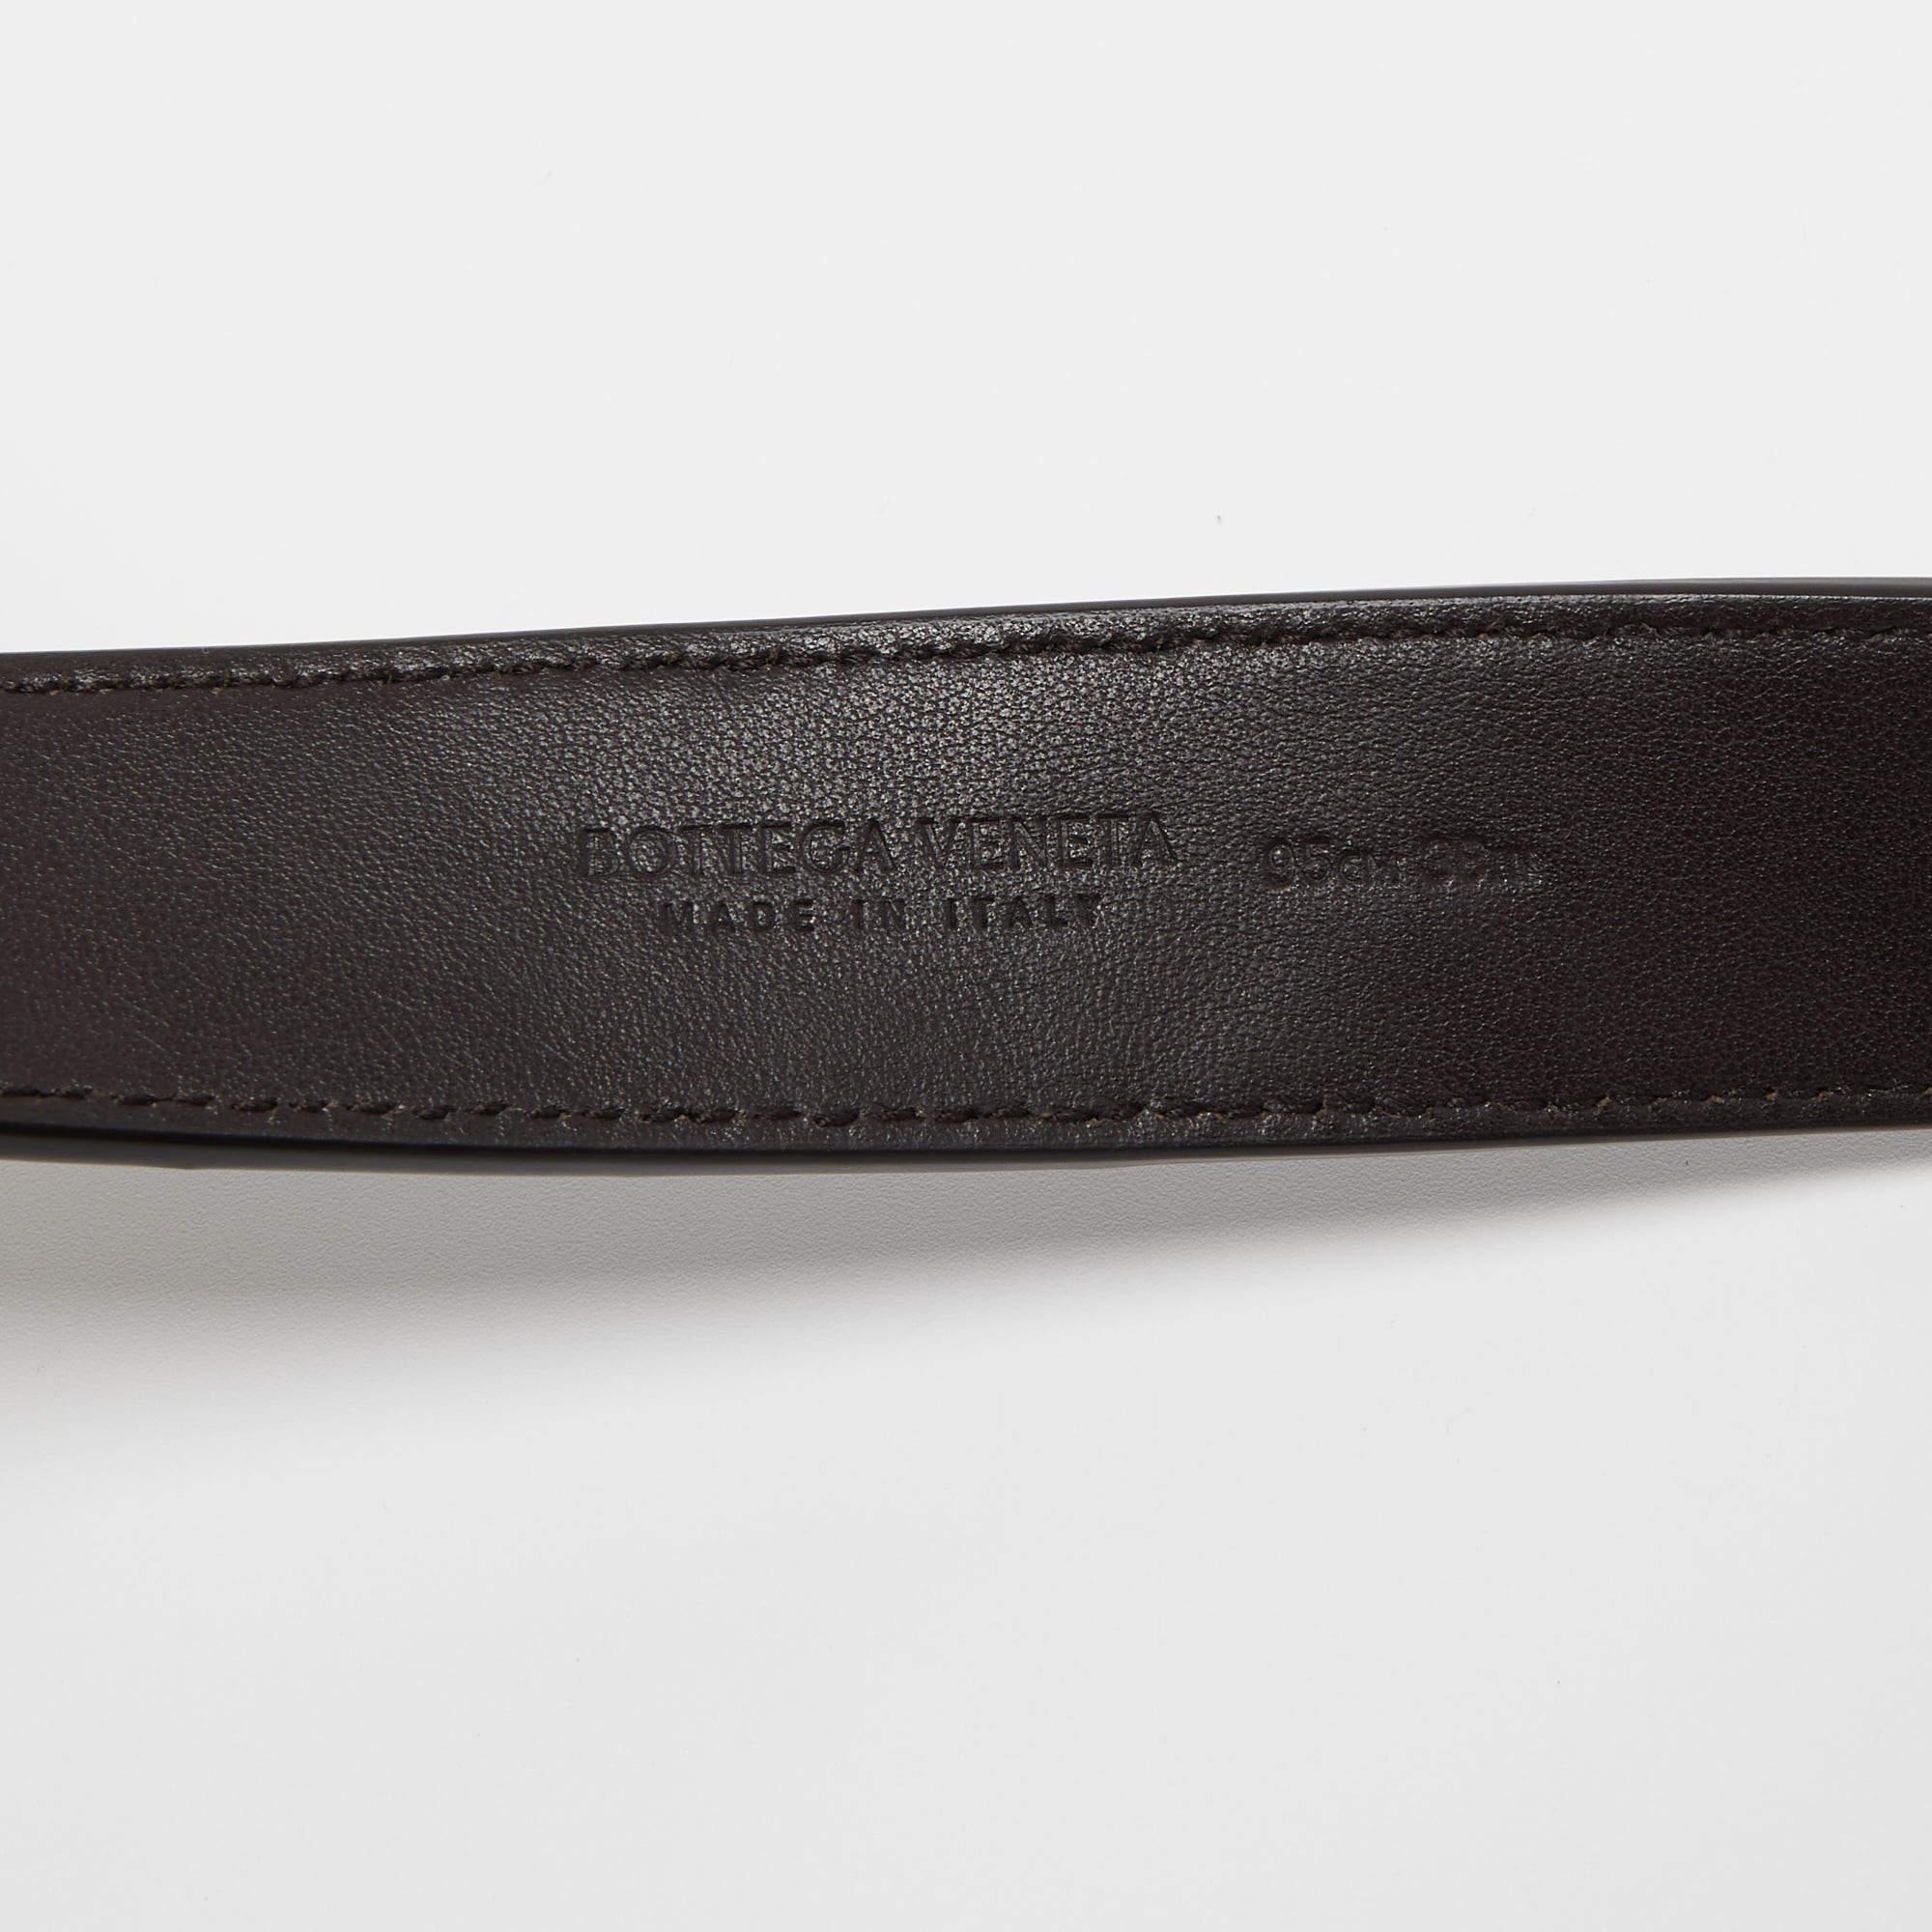 Add a sleek finish to your OOTD with this Bottega Veneta belt. It is carefully crafted to last well and boost your style for a long time.

Includes: Brand Dustbag

